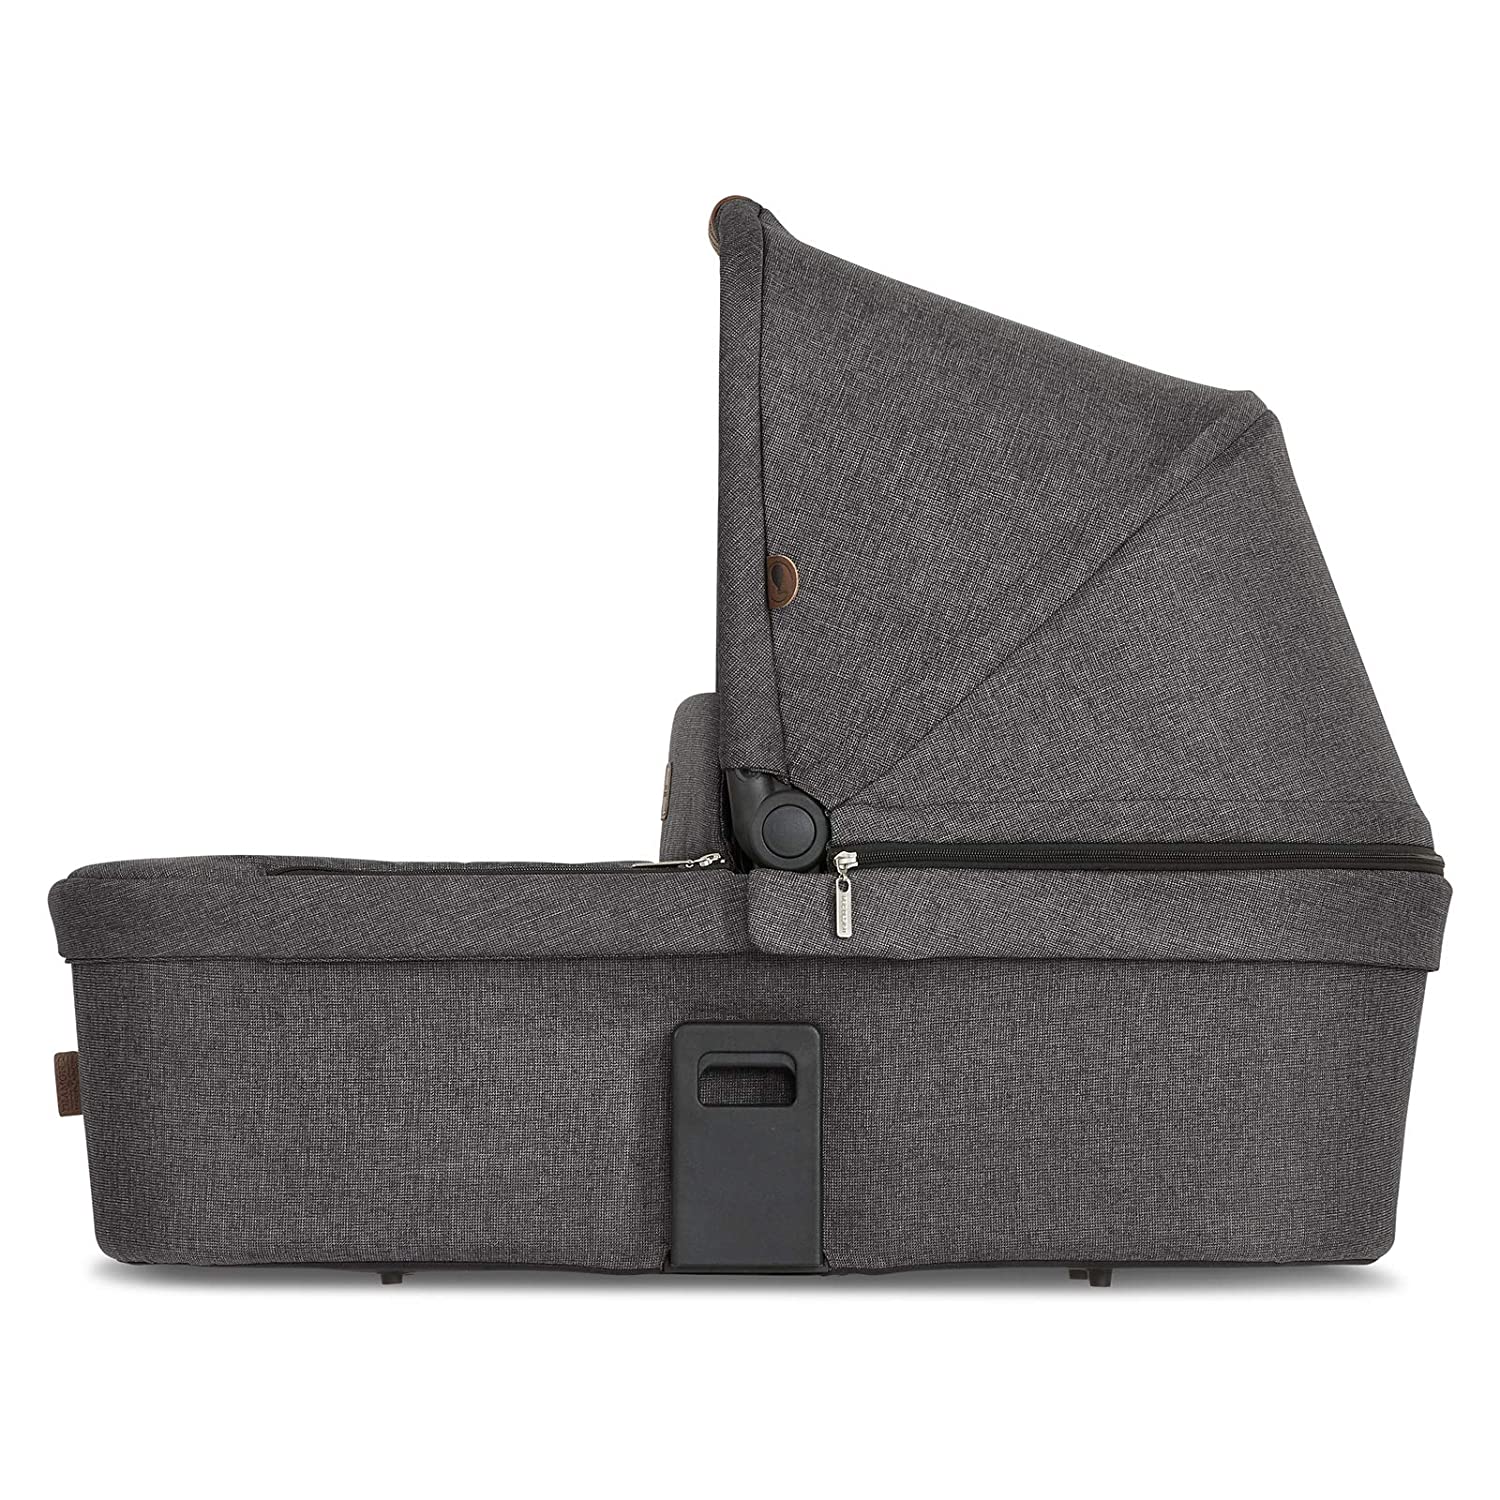 ABC Design Zoom Baby Carrycot - Foldable Carry Cot - for Babies and Newborns - Compatible with Zoom Siblings - Colour: Asphalt